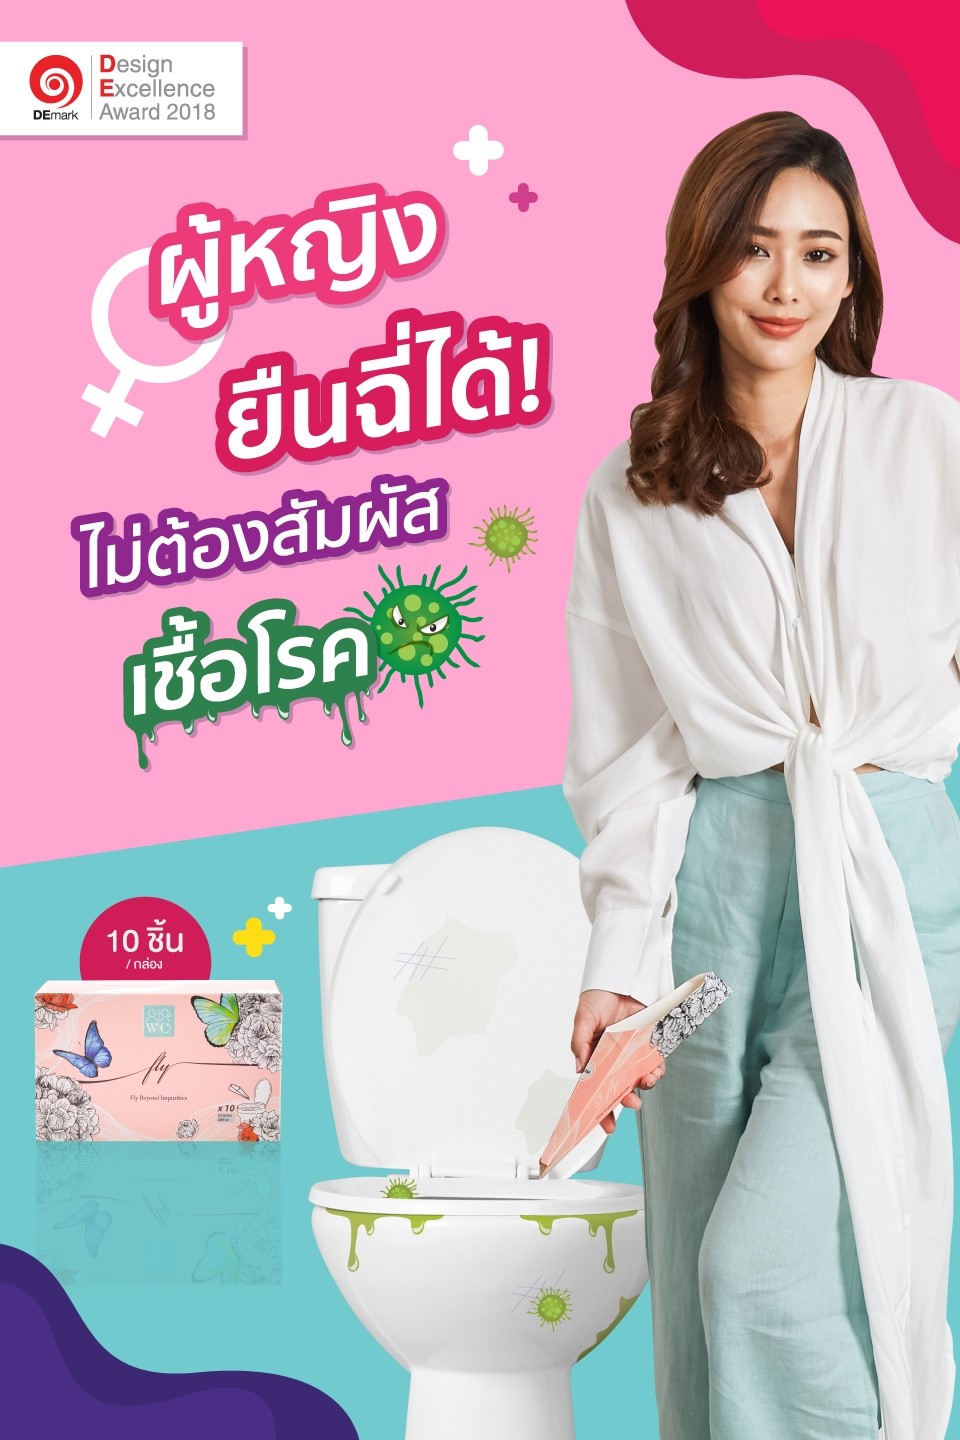 Fly กรวยยืนปัสสาวะสำหรับผู้หญิง หมดกังวลเรื่องห้องน้ำสกปรก  Portable Female Urination Device Lets Women Pee Standing Up - One-time Use, Paper, Decomposable, For Traveling and Outdoor Activities